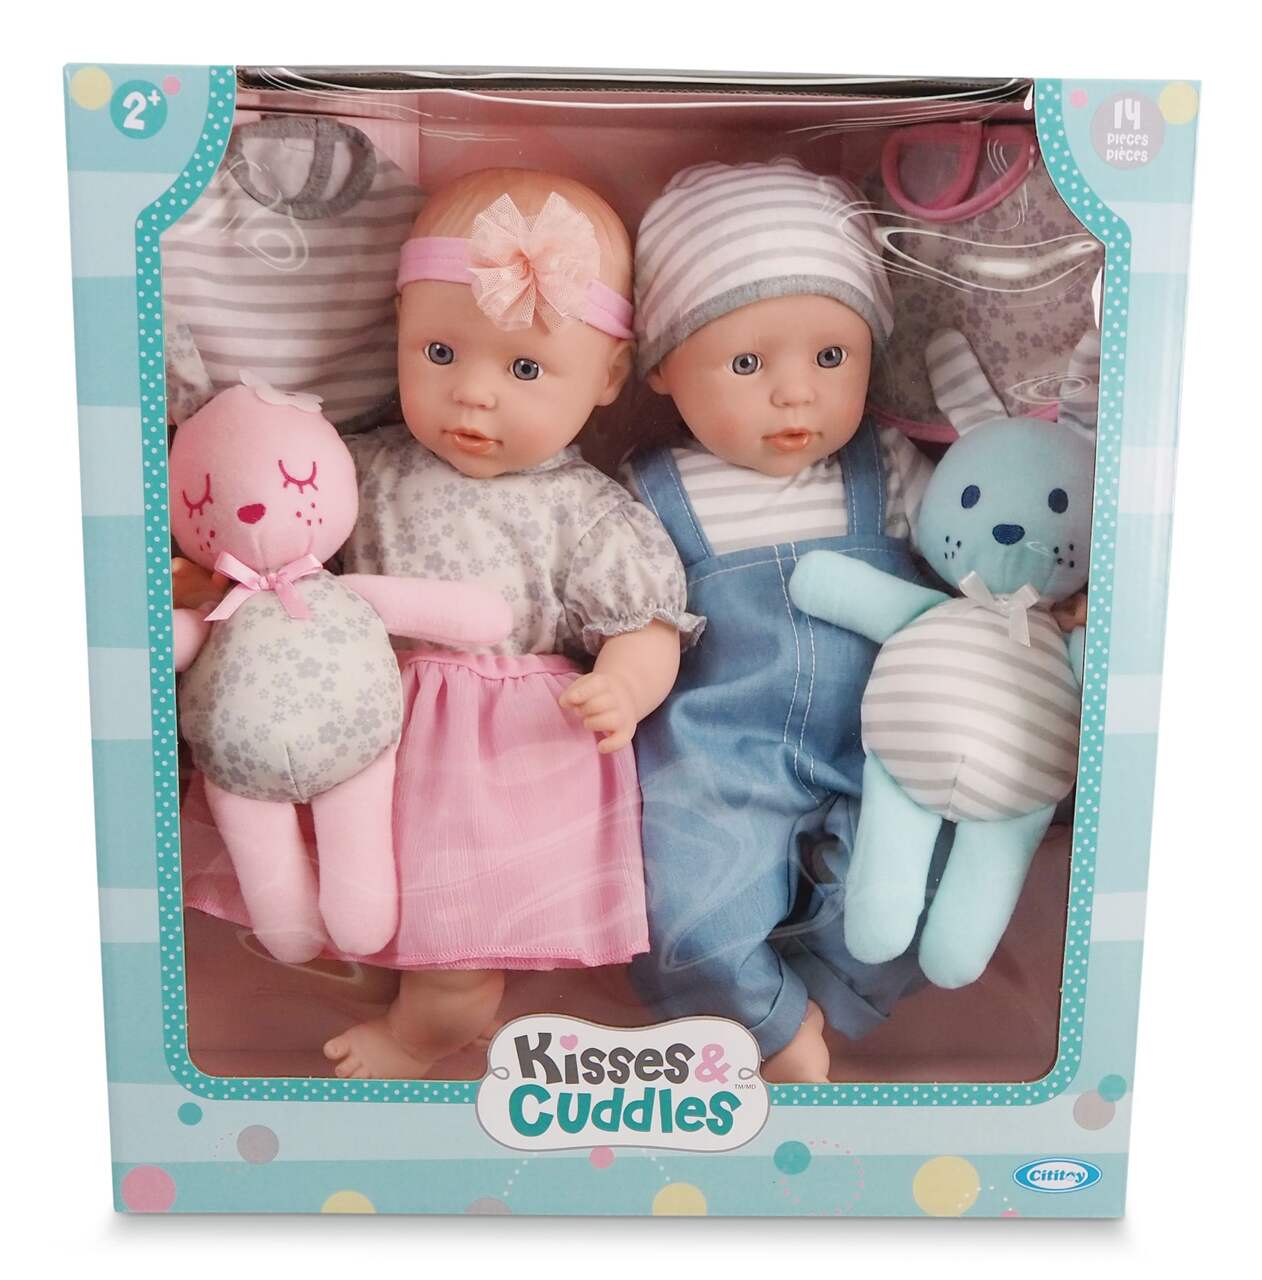 Nenuco - Always Play with Me - Baby Doll with Travel Bag 2 In 1